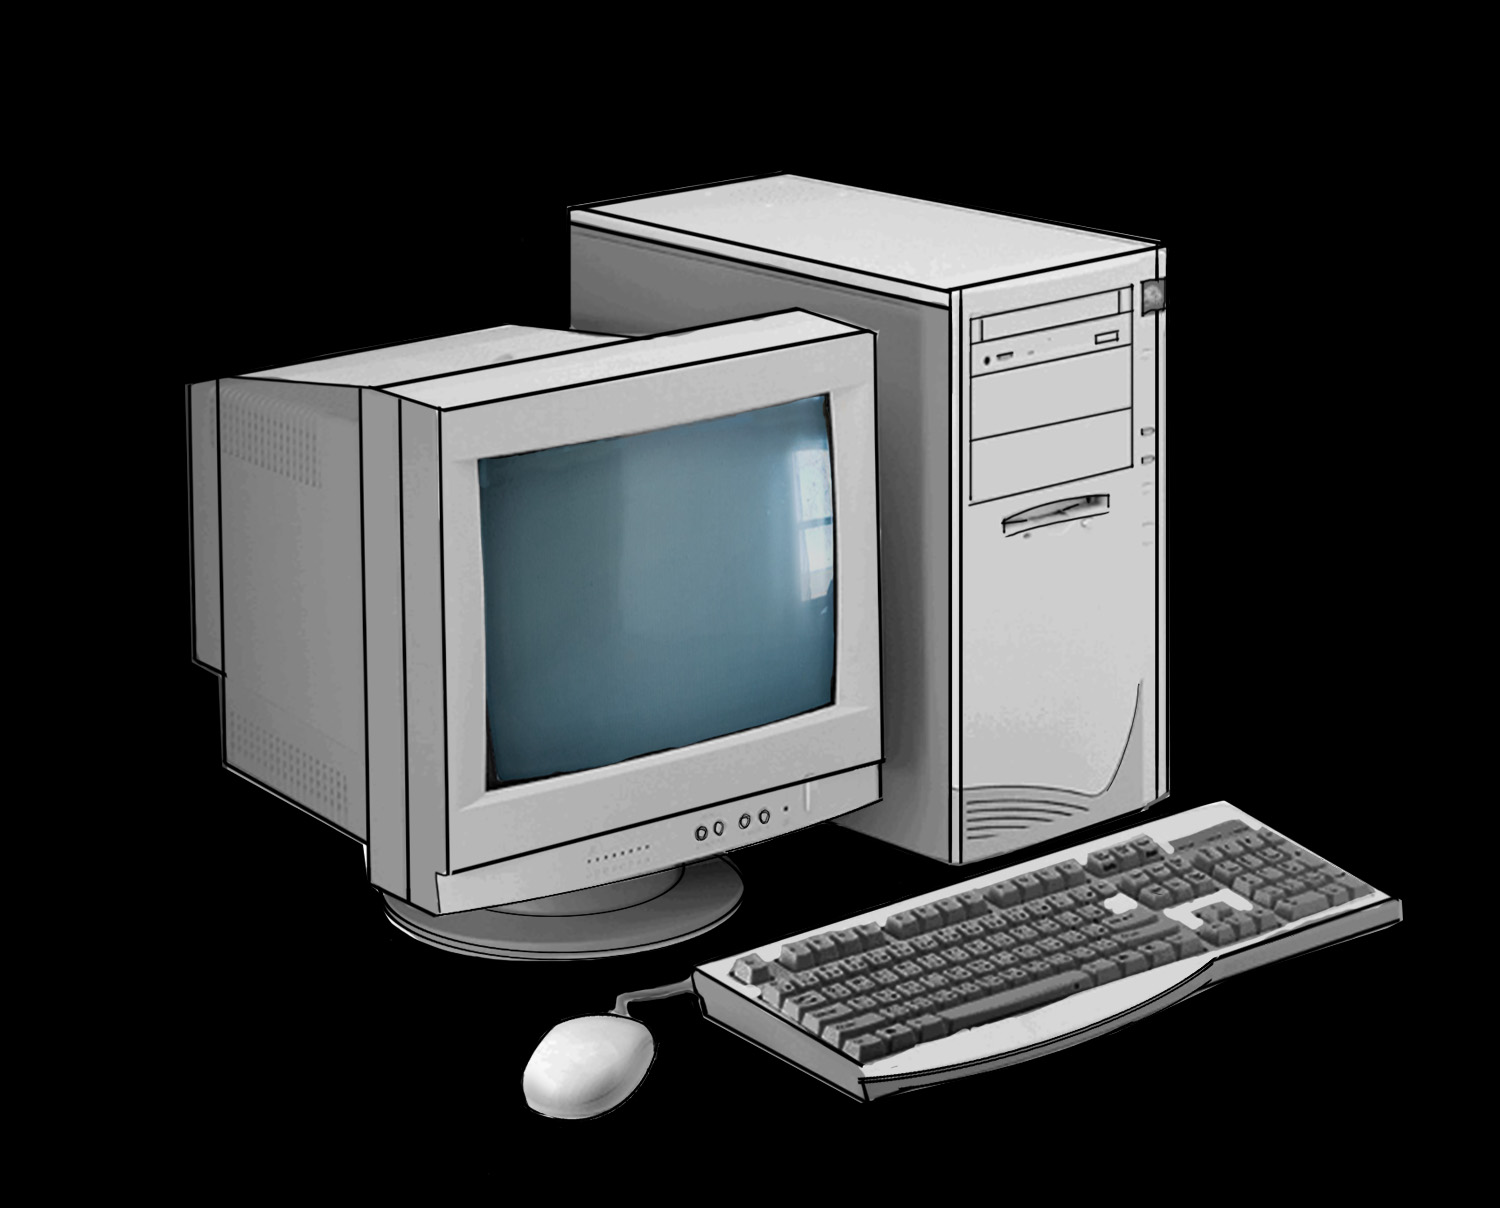 Kit Computers, Home Computers, Personal Computers, Portable Computers